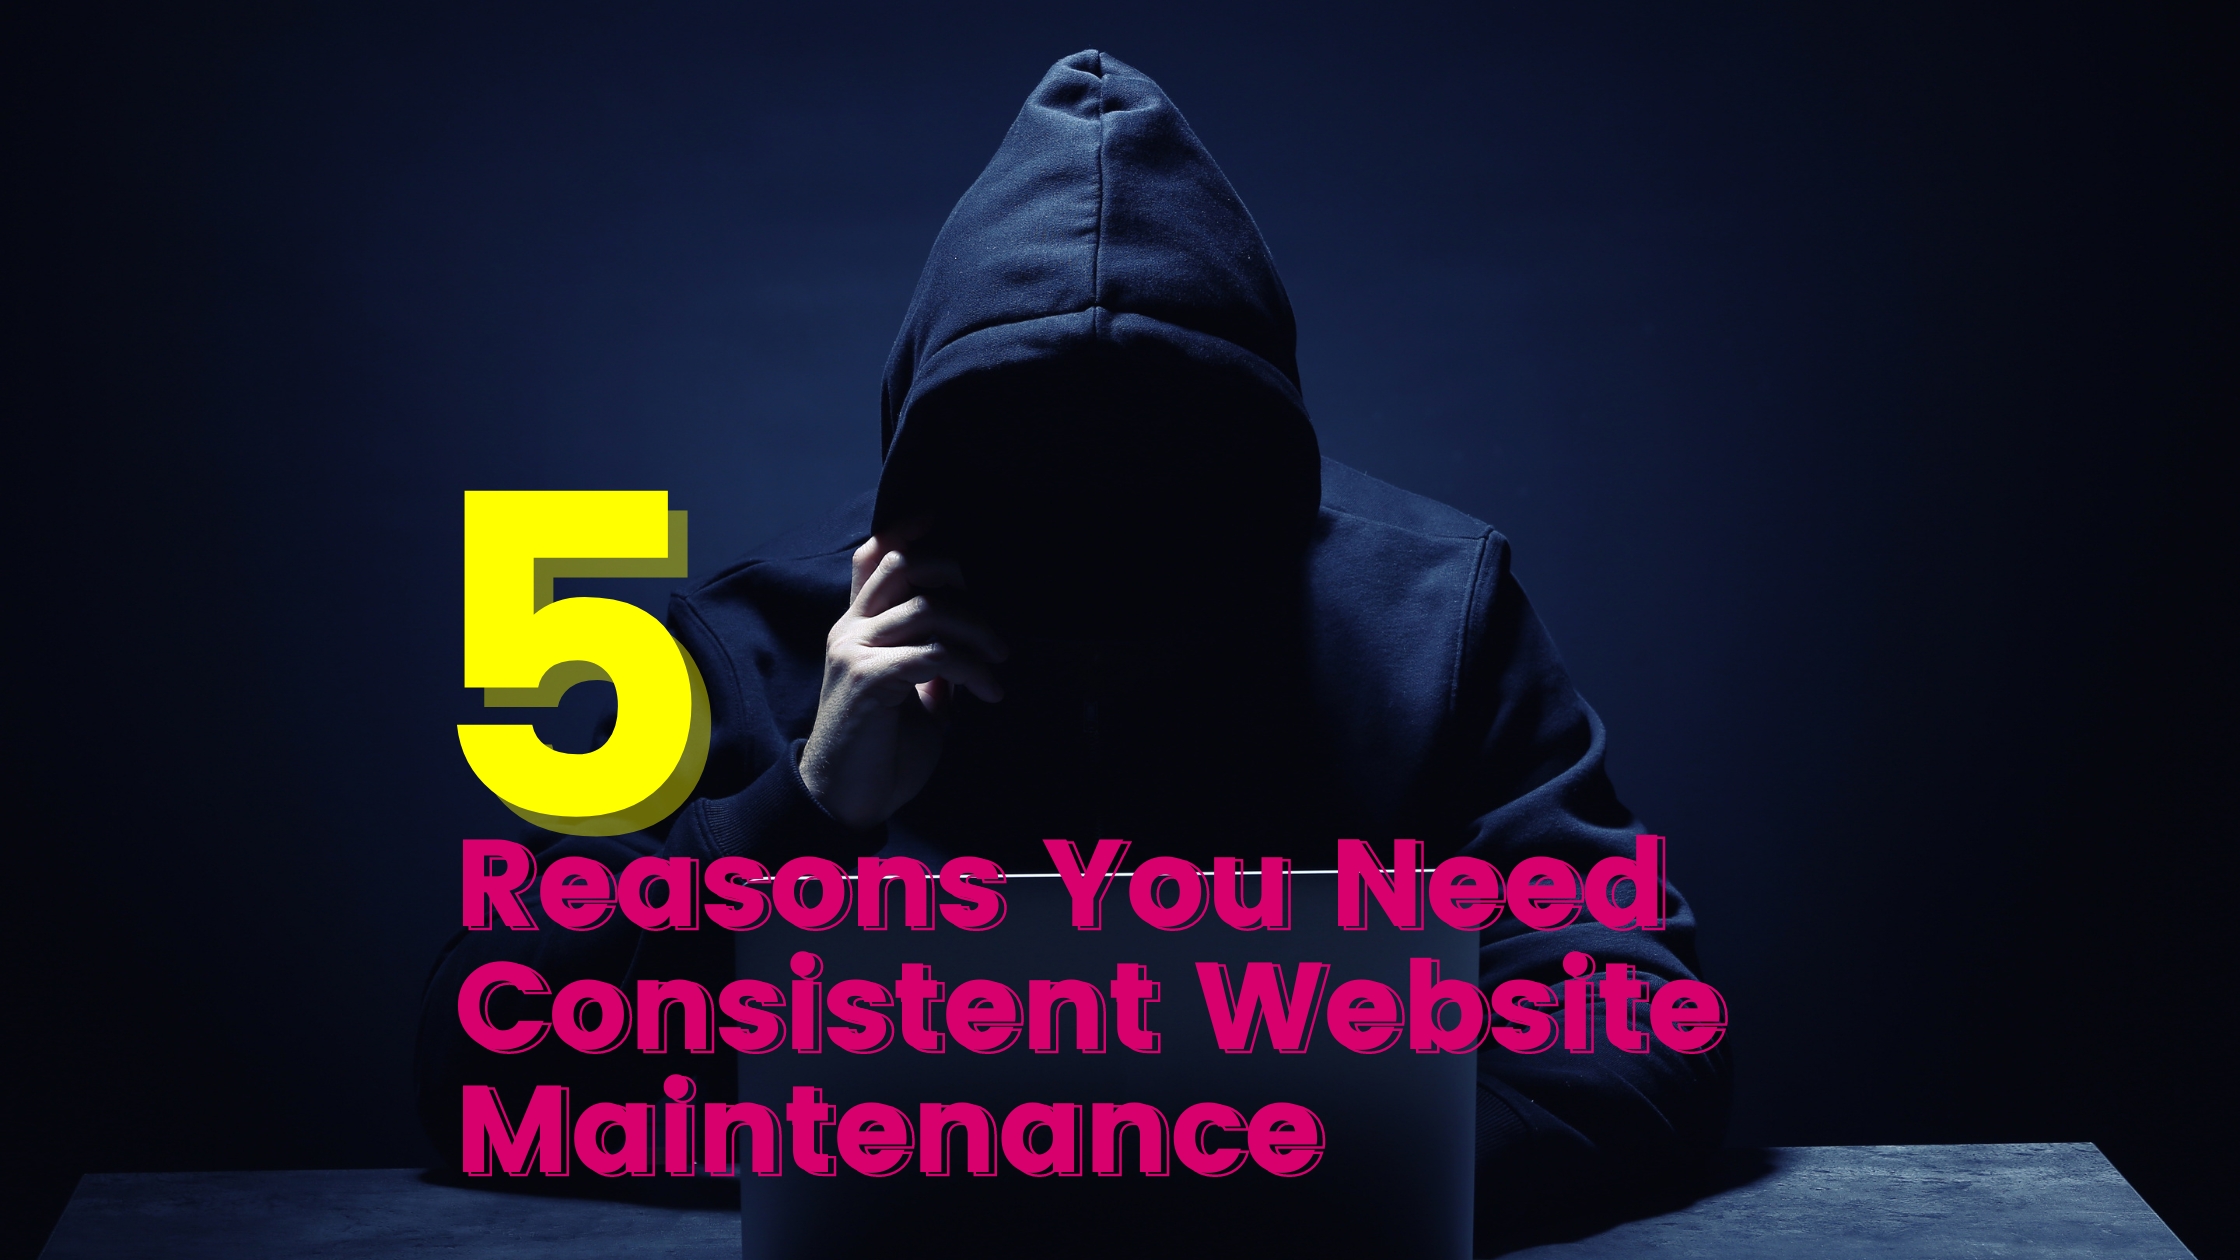 5 Essential Reasons Why You Need Regular Website Maintenance with hacker wearing all black behind words as he is talking on a phone